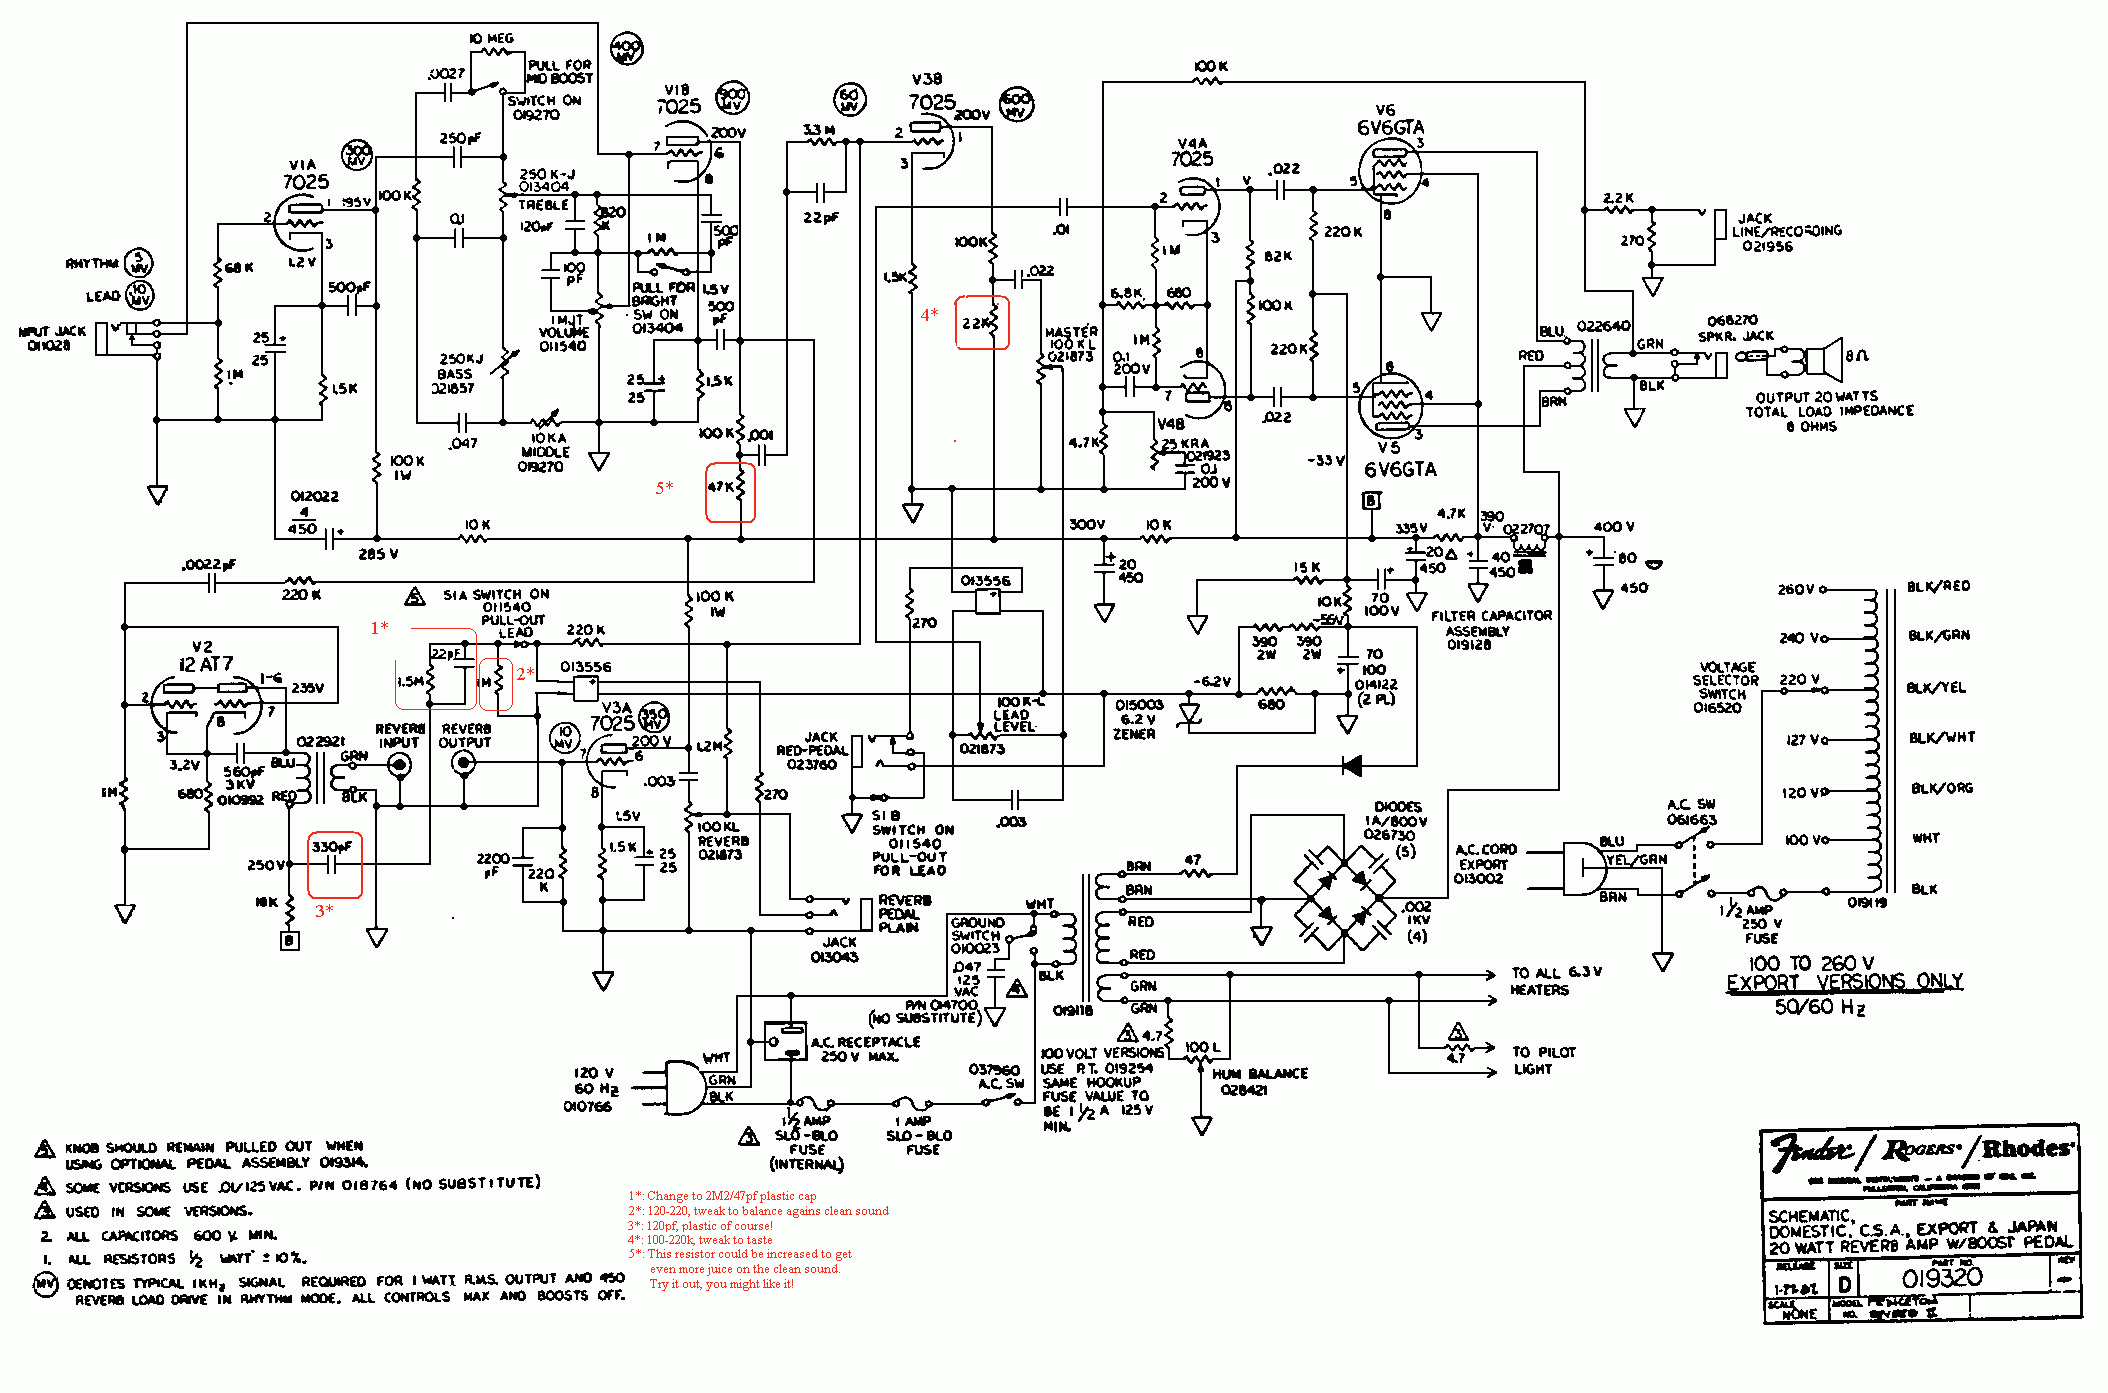 schematic with high gain mods